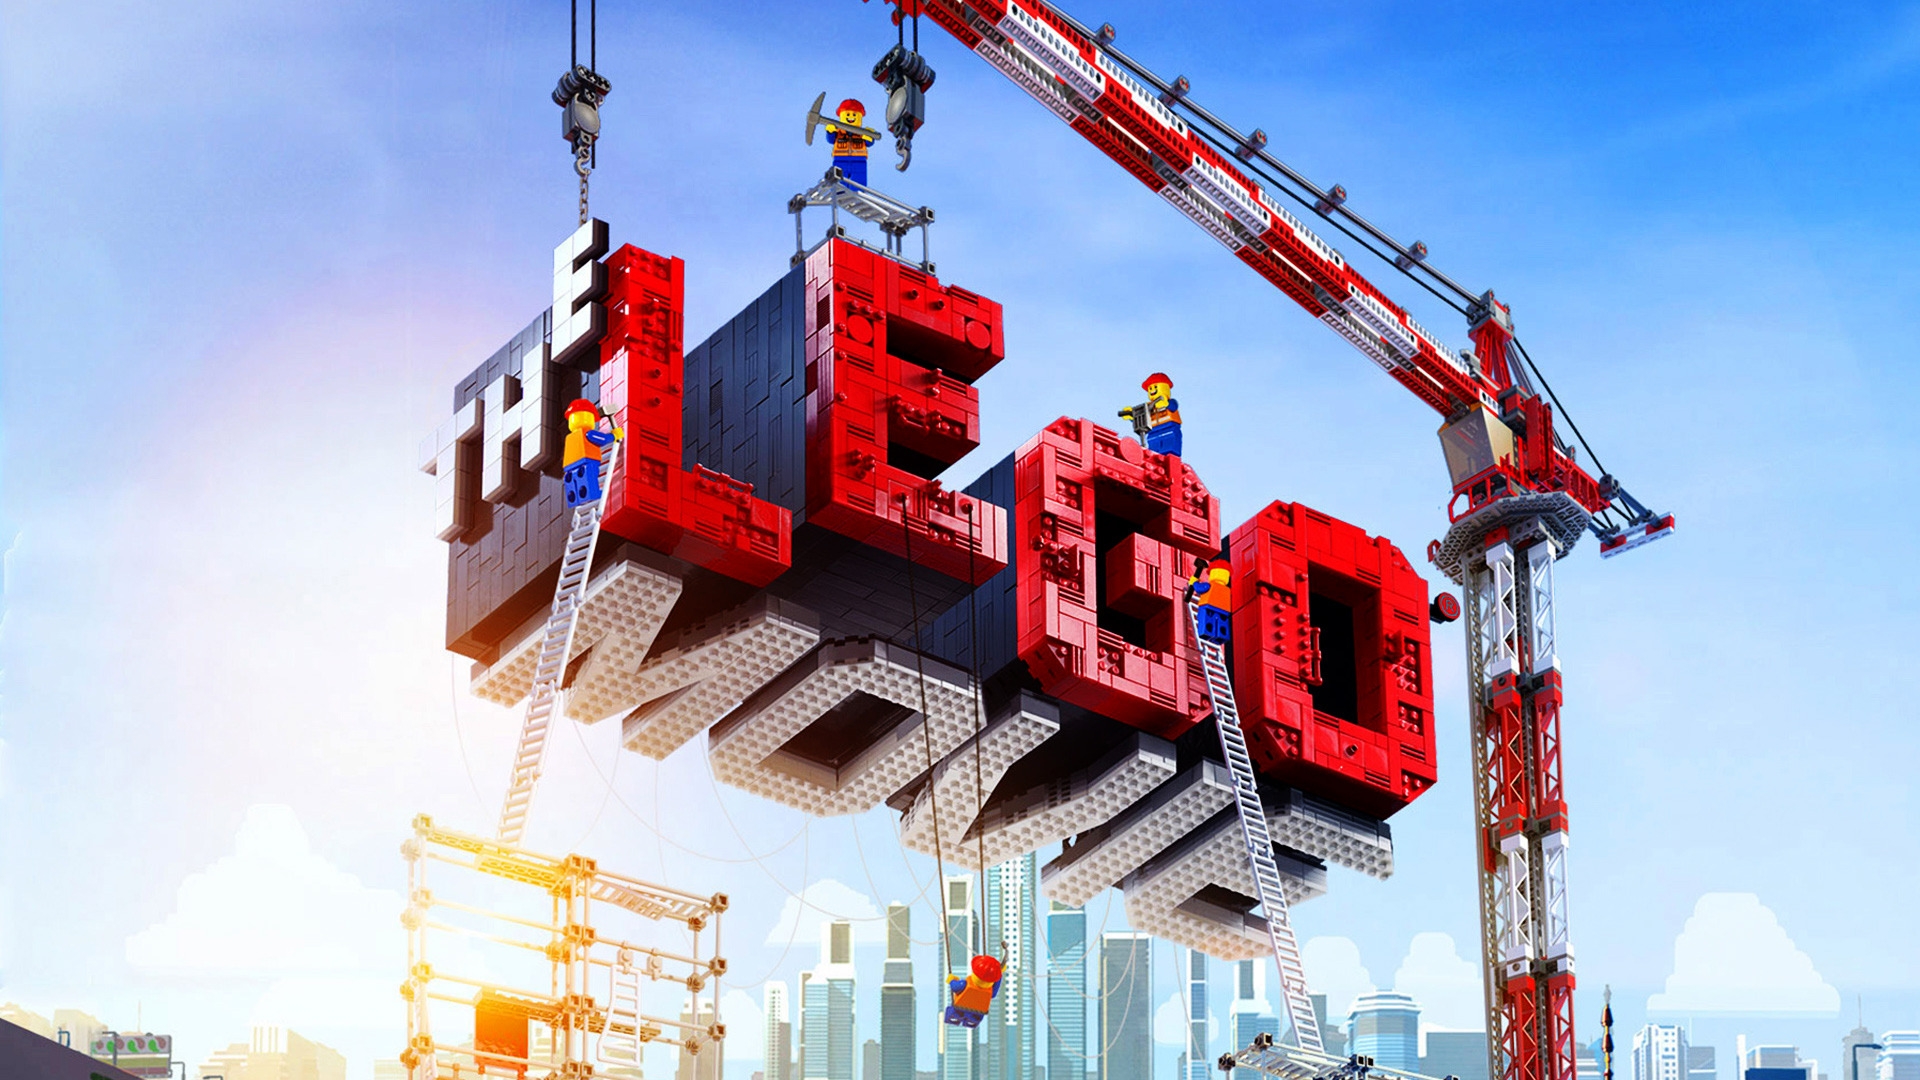 2014 The Lego Movie for 1920 x 1080 HDTV 1080p resolution